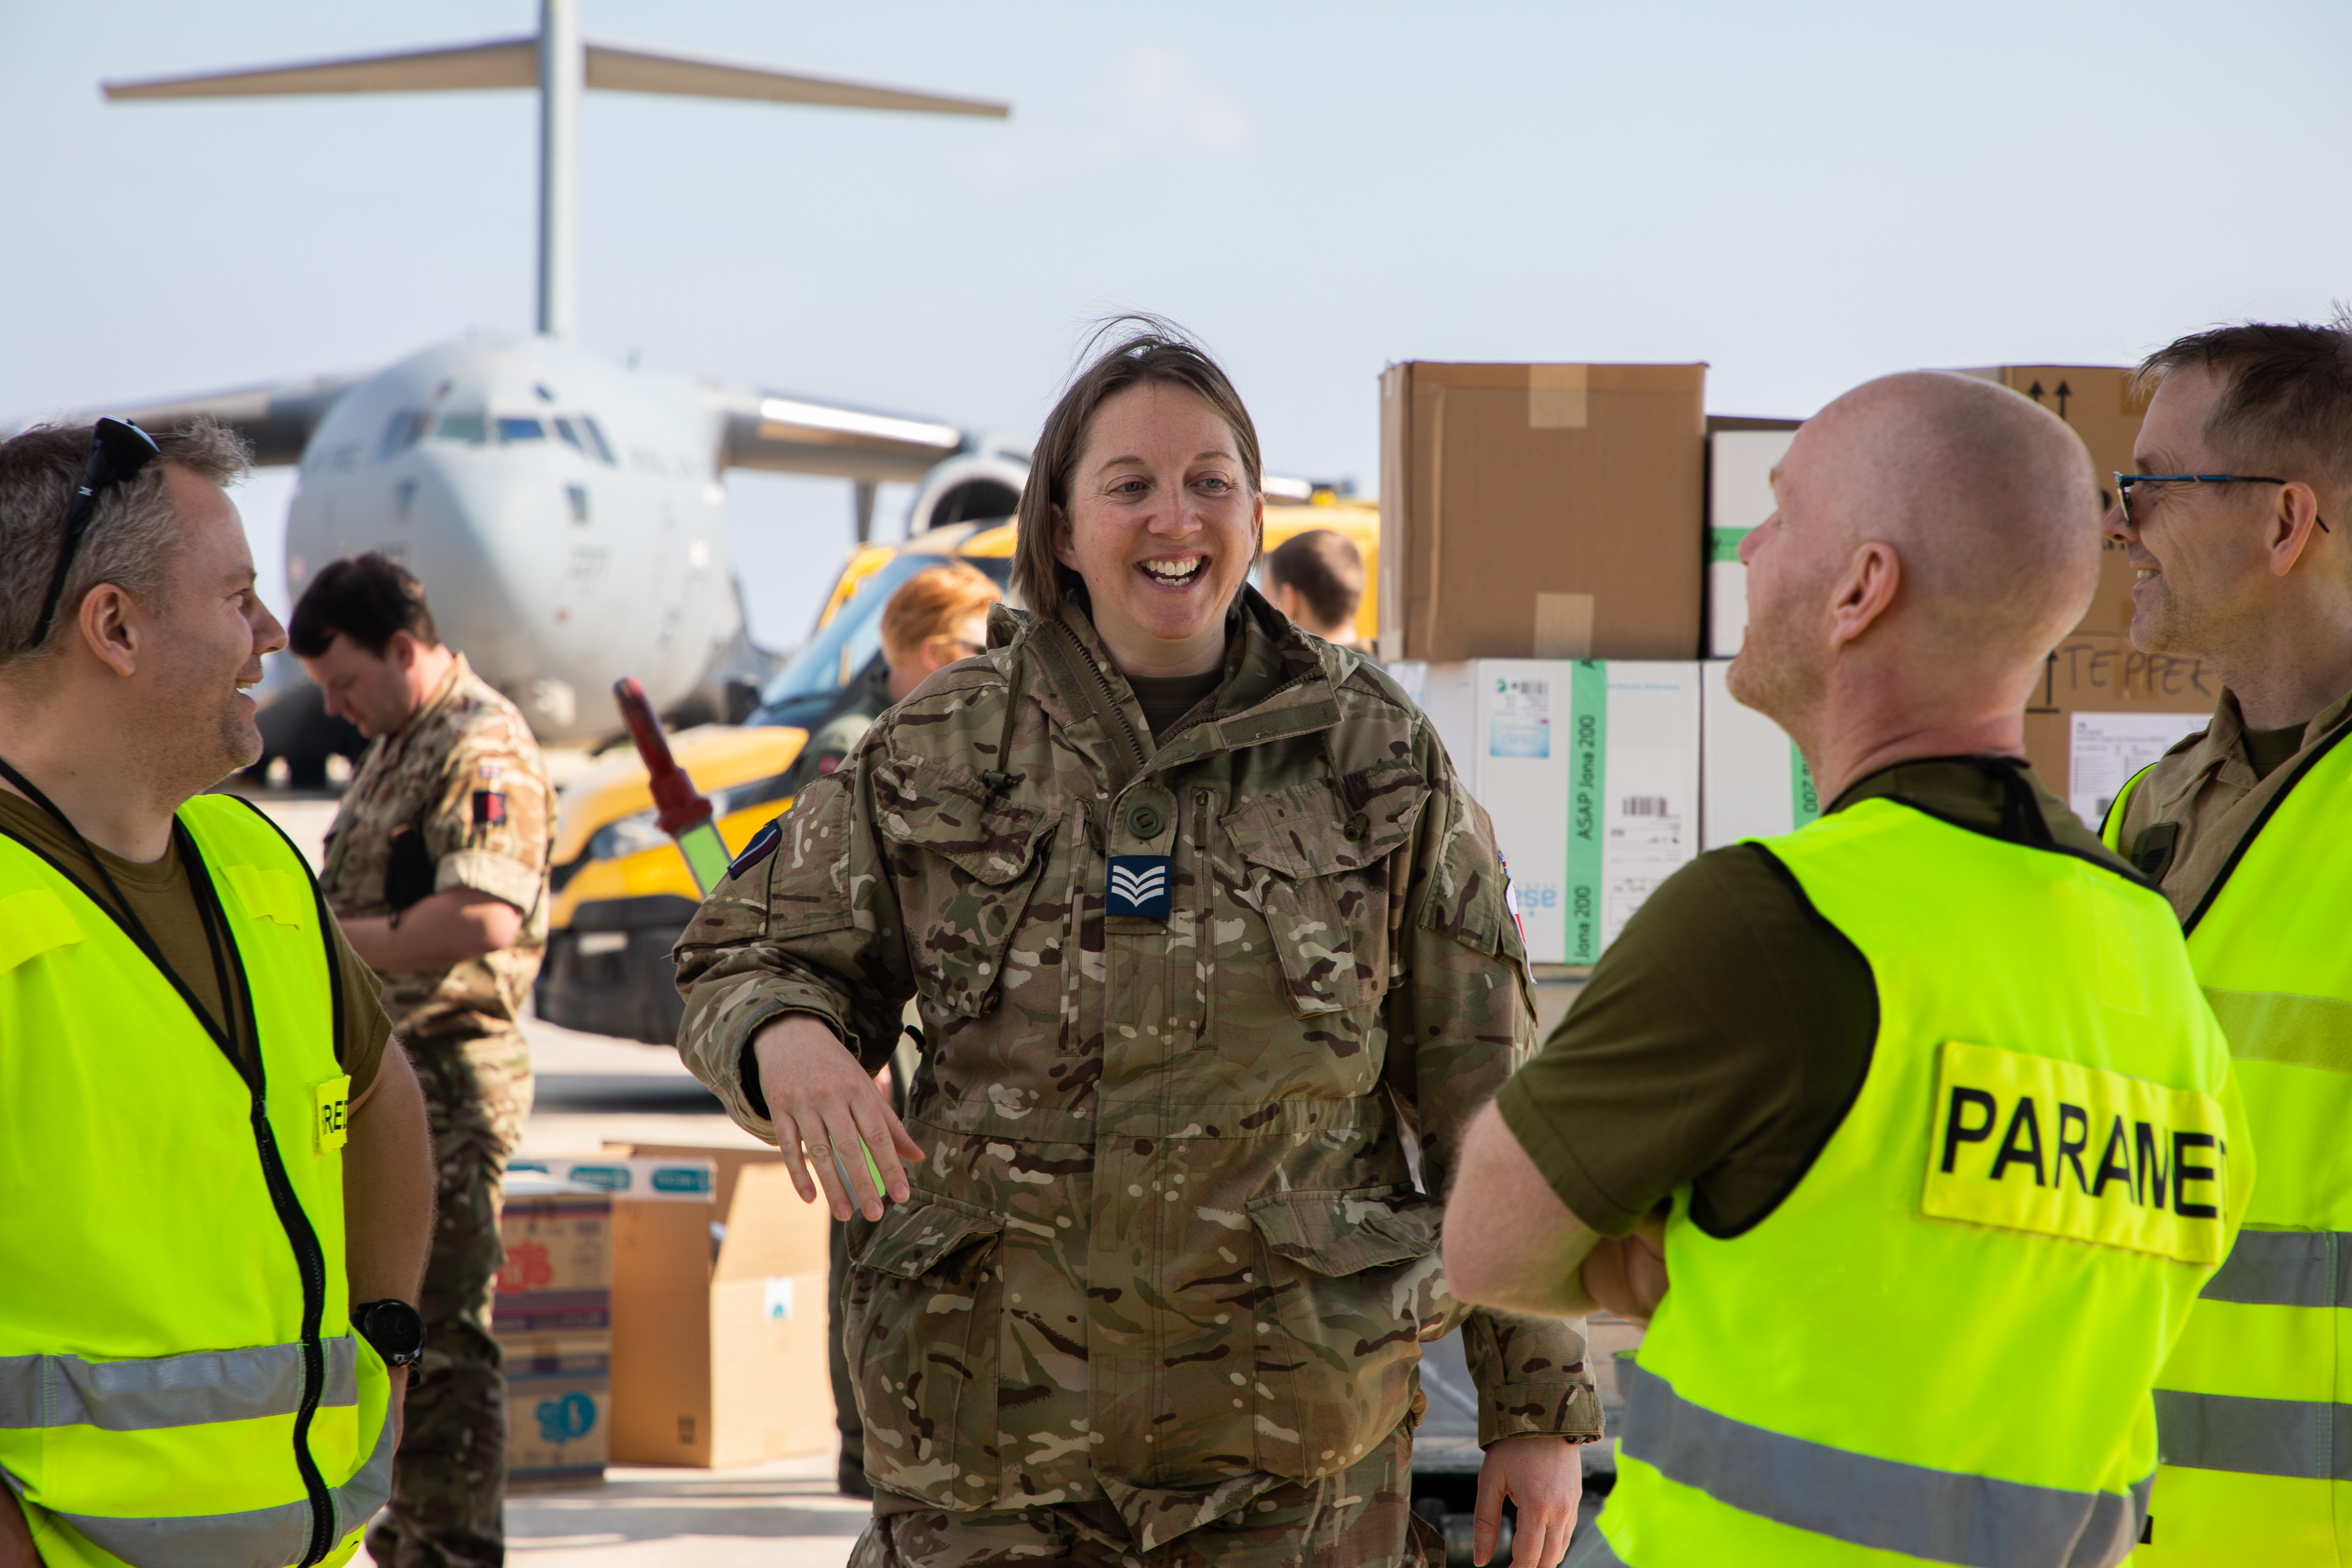 Image shows RAF medics on the airfield with RAF Hercules aircraft in the background.